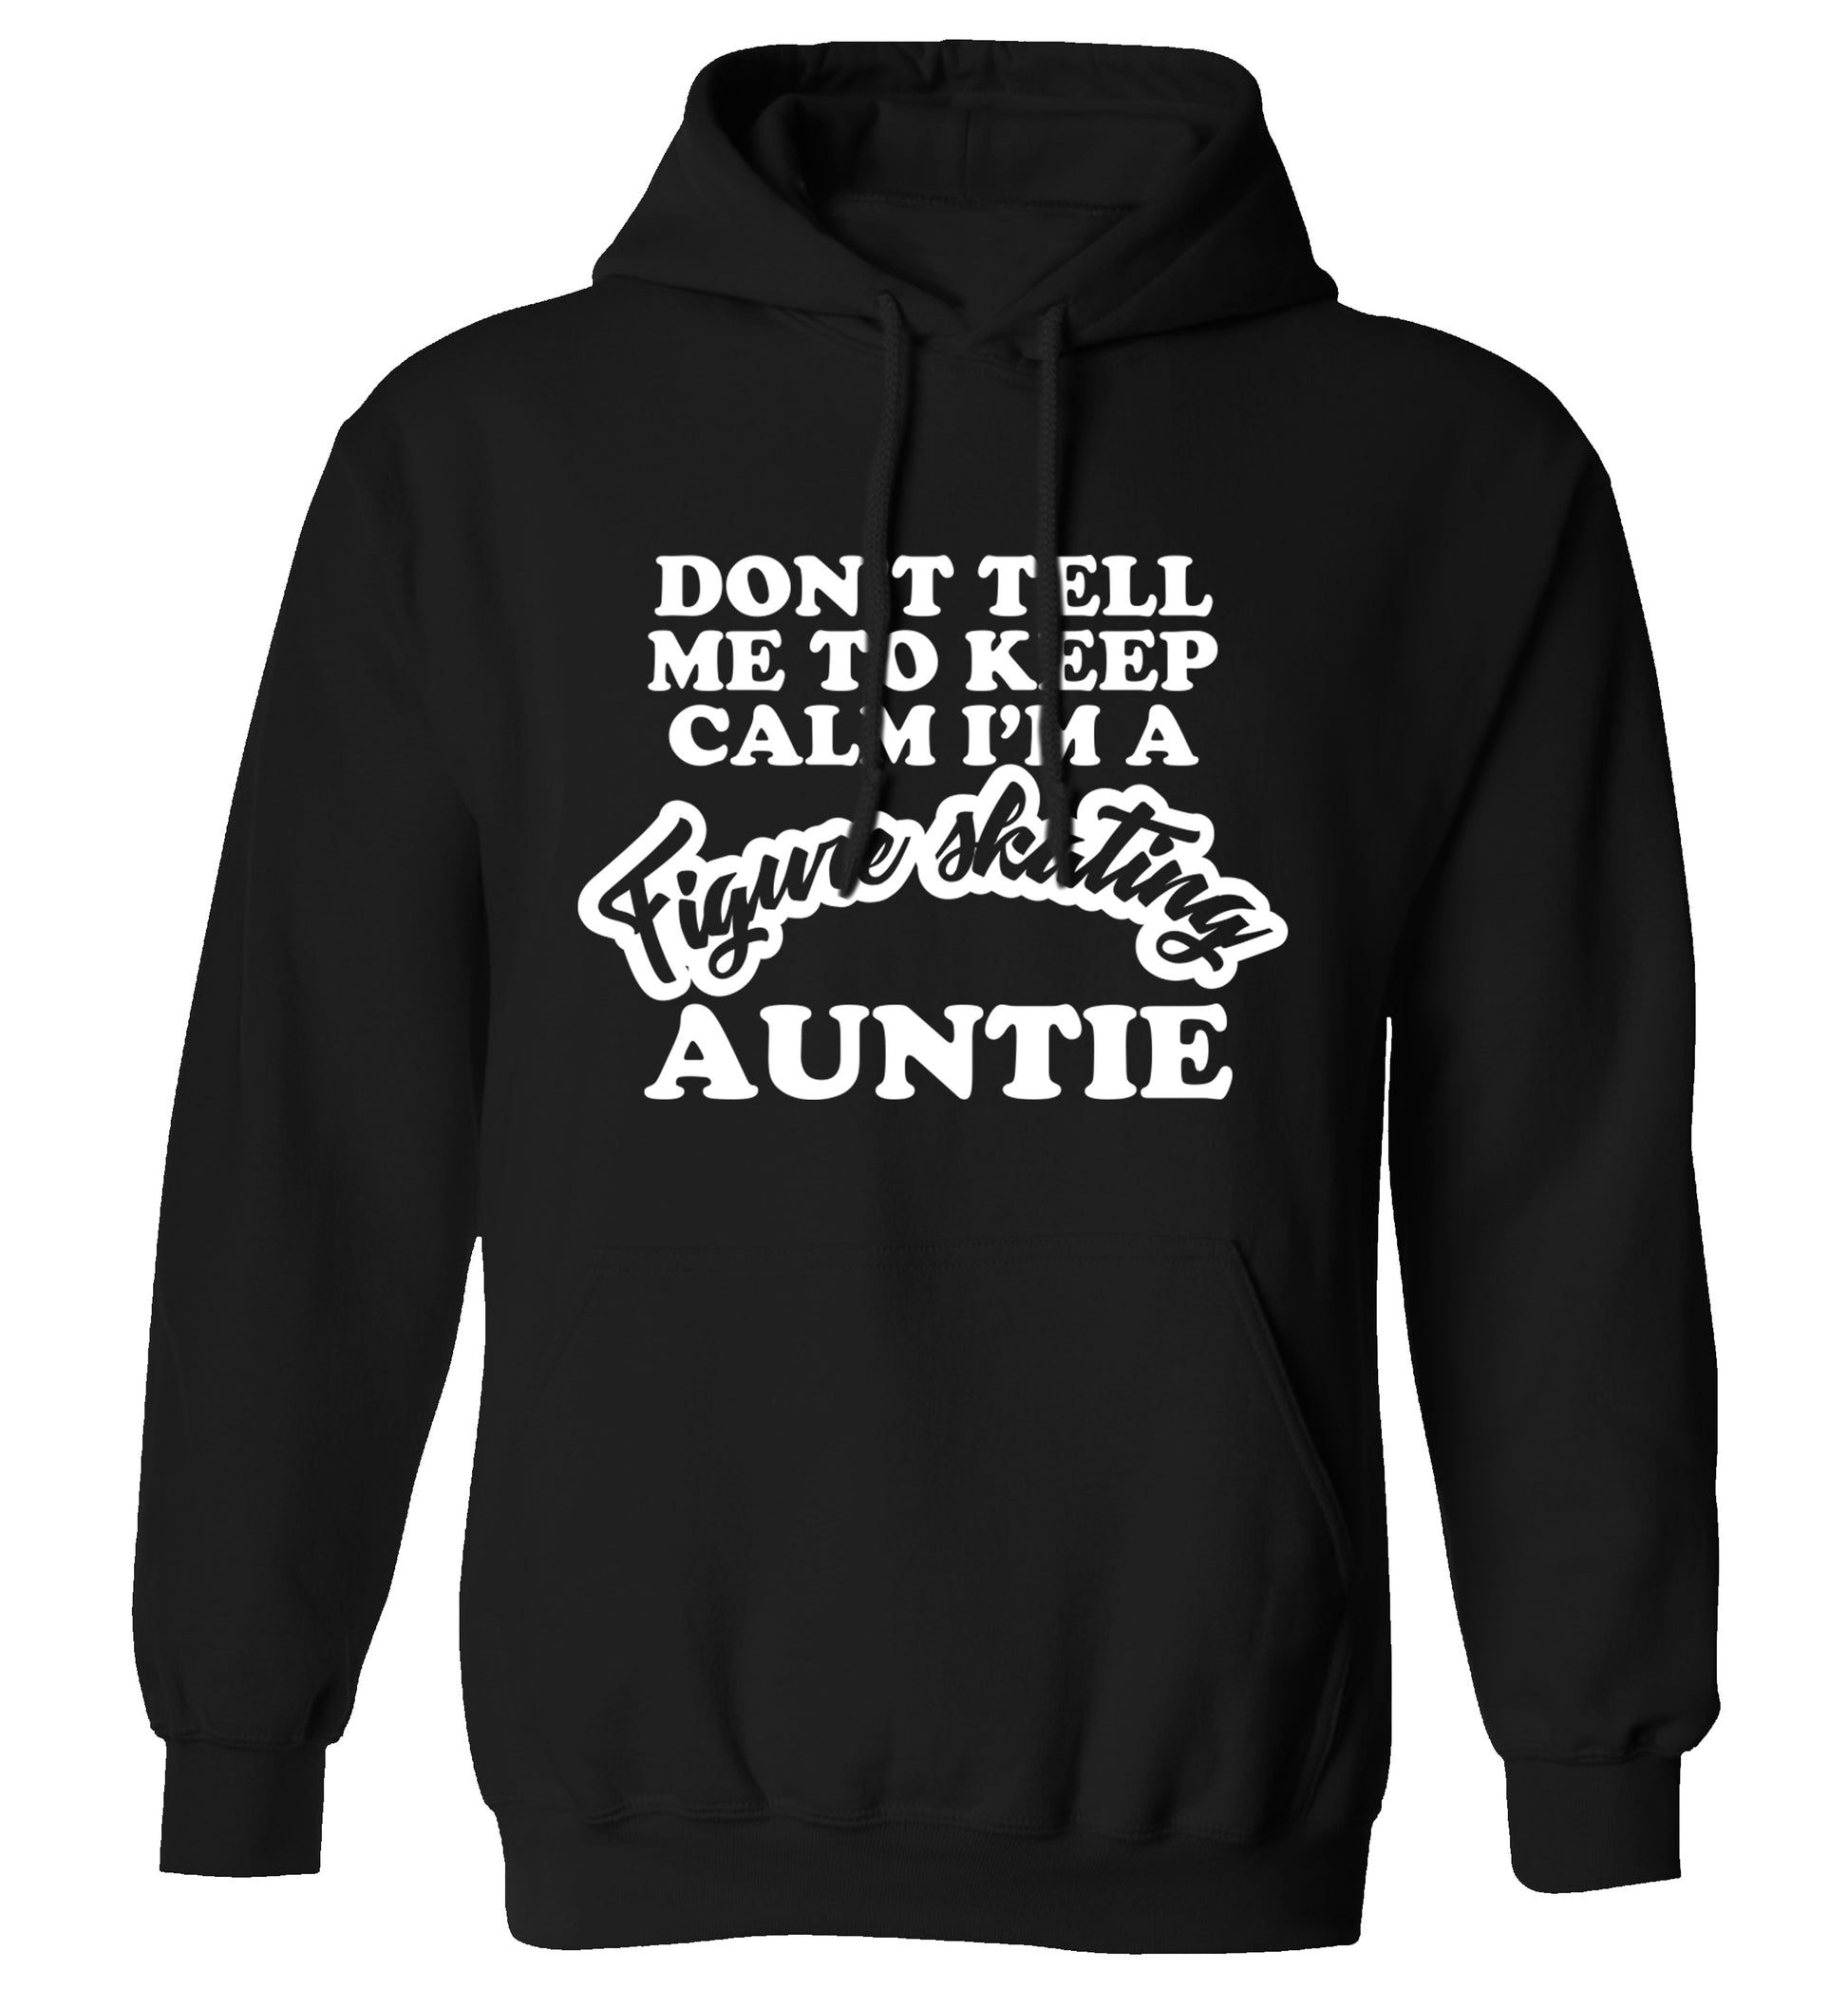 Don't tell me to keep calm I'm a figure skating auntie adults unisexblack hoodie 2XL